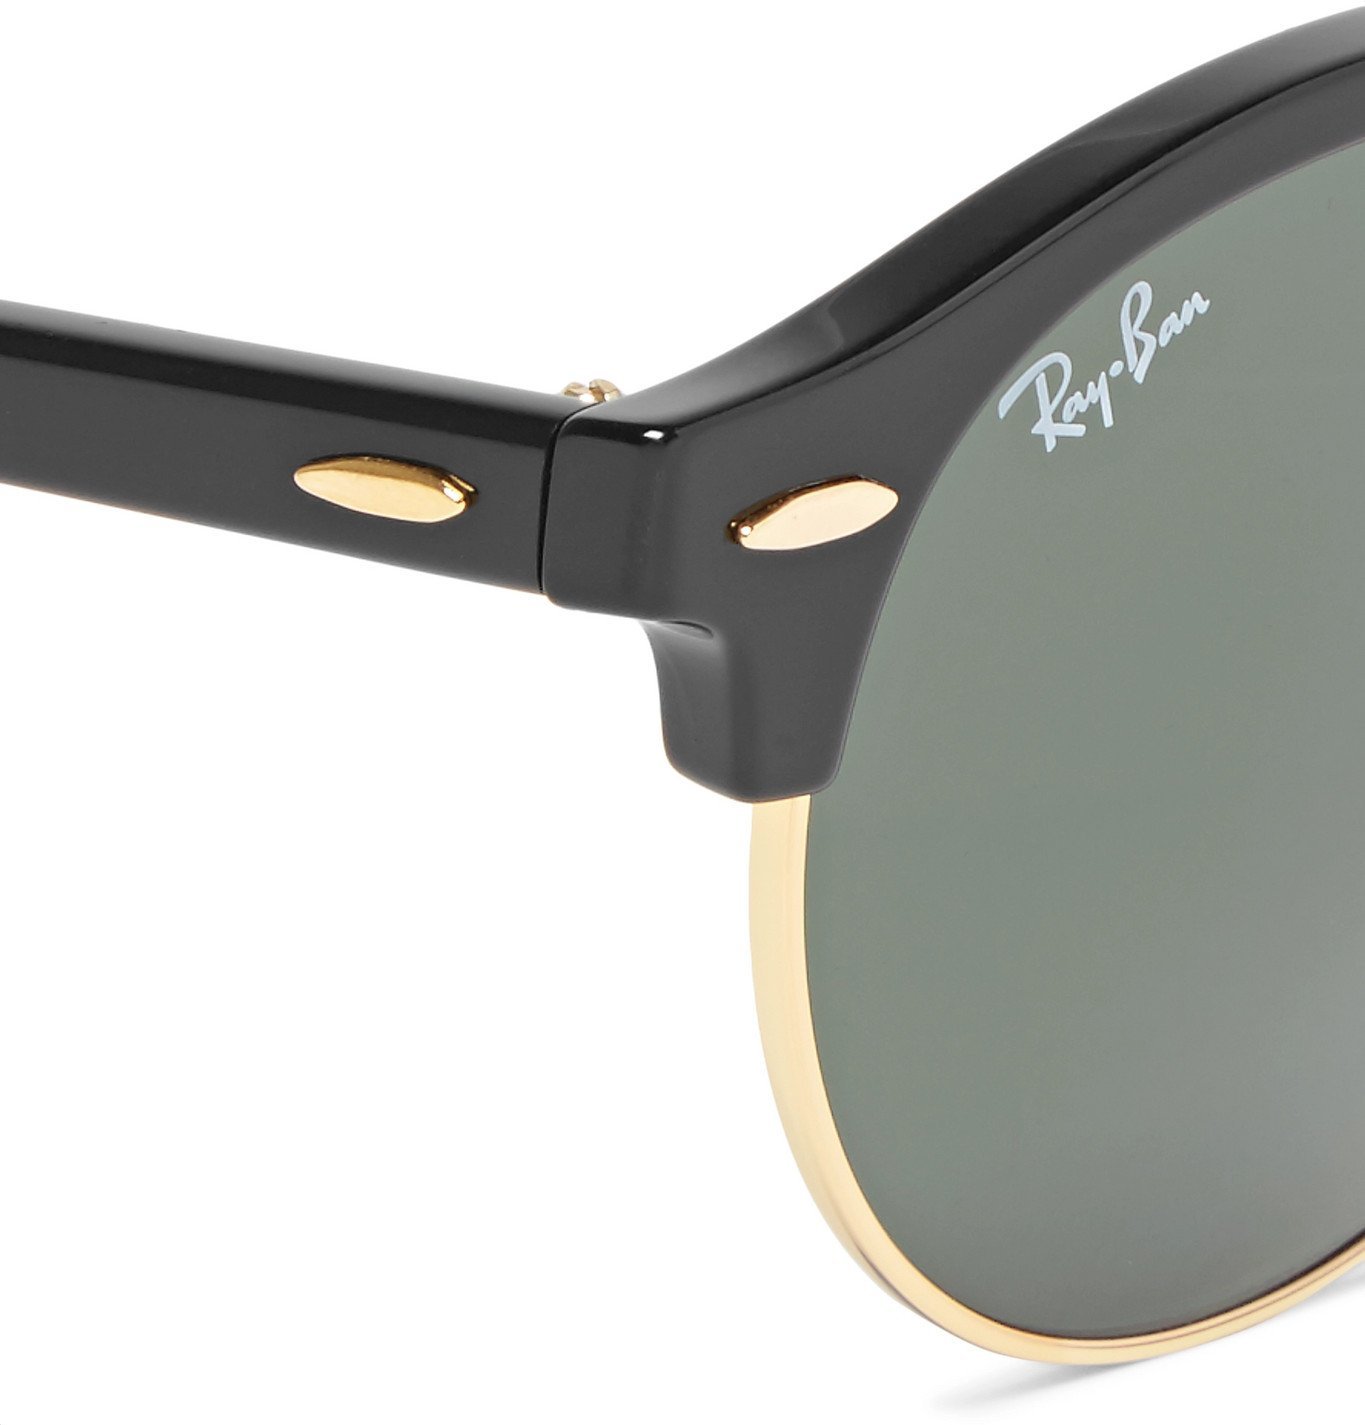 Ray Ban Clubmaster Round Frame Acetate And Gold Tone Polarised Sunglasses Black Ray Ban